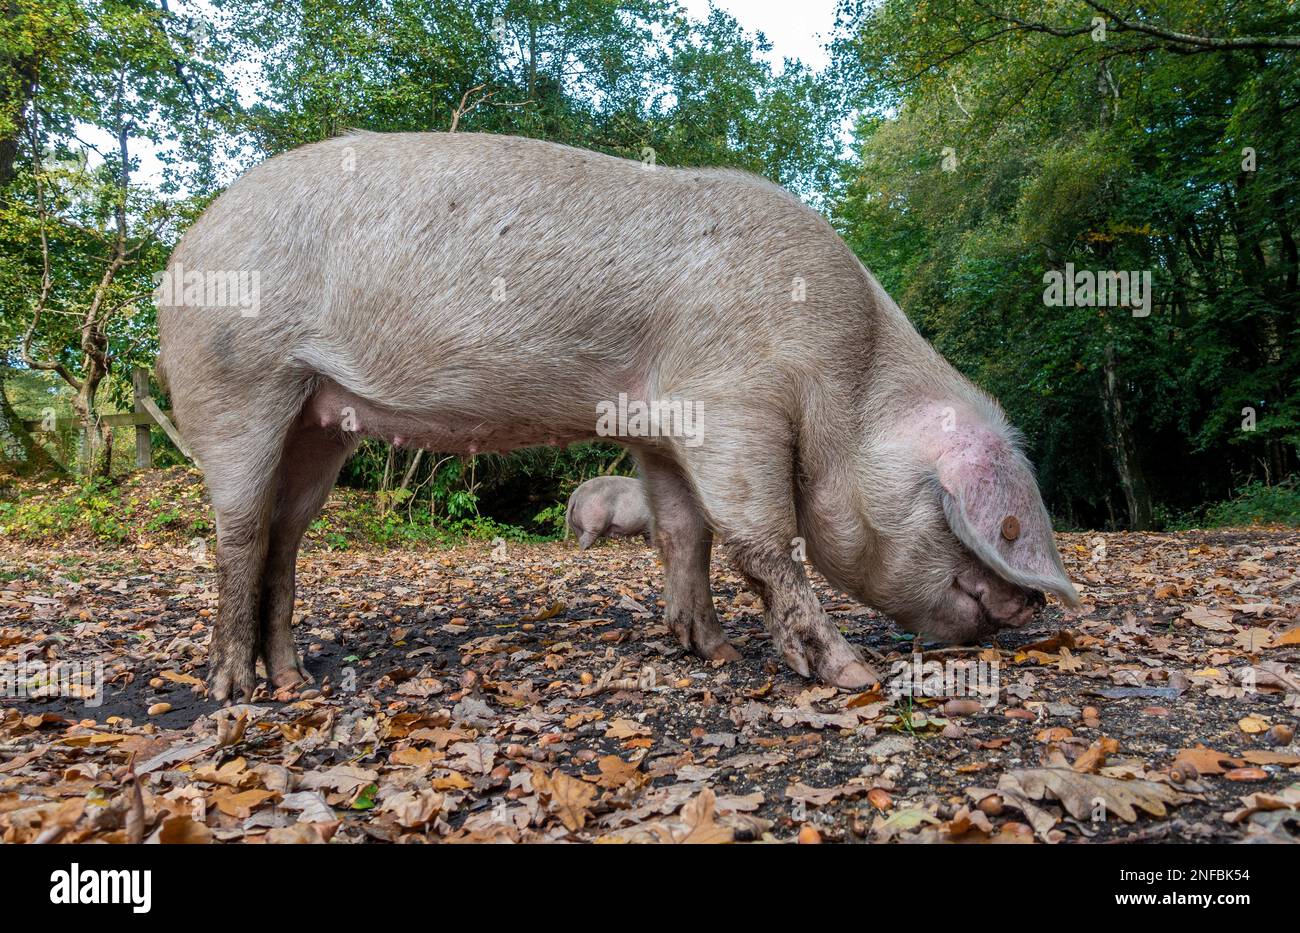 Pannage or Common Mast - Free roaming domestic pigs roam the New Forest in September when acorns and other nuts fall from the trees. Stock Photo